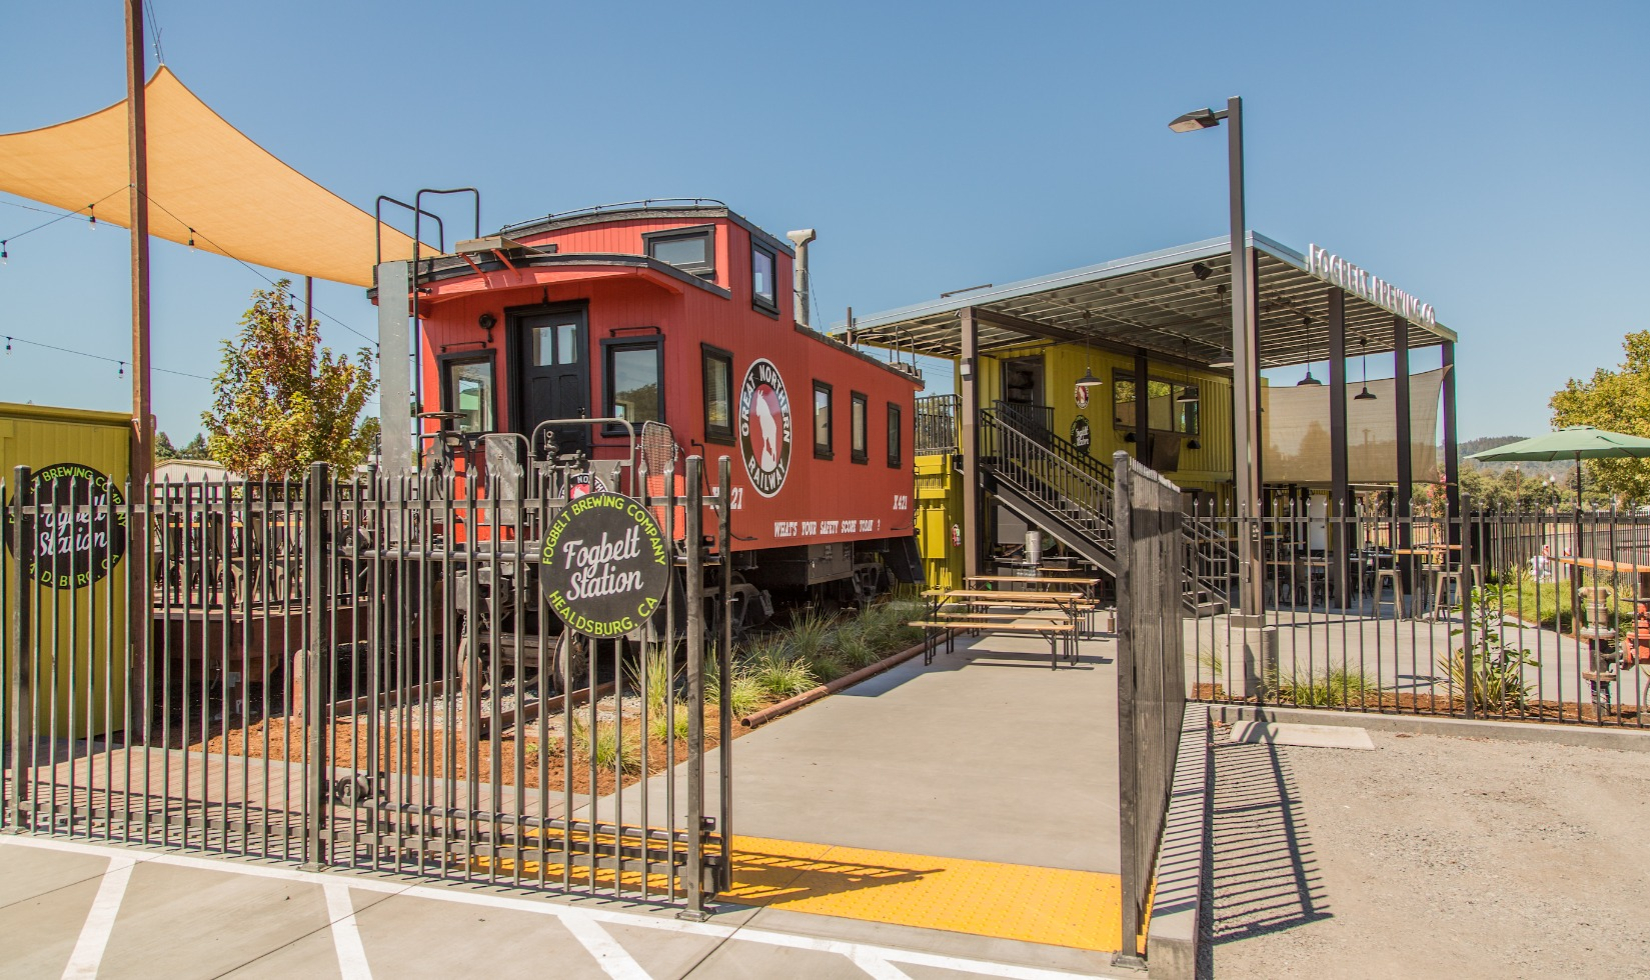 Exterior of Fogbelt station with red train caboose structure next to wooden deck with seating. 